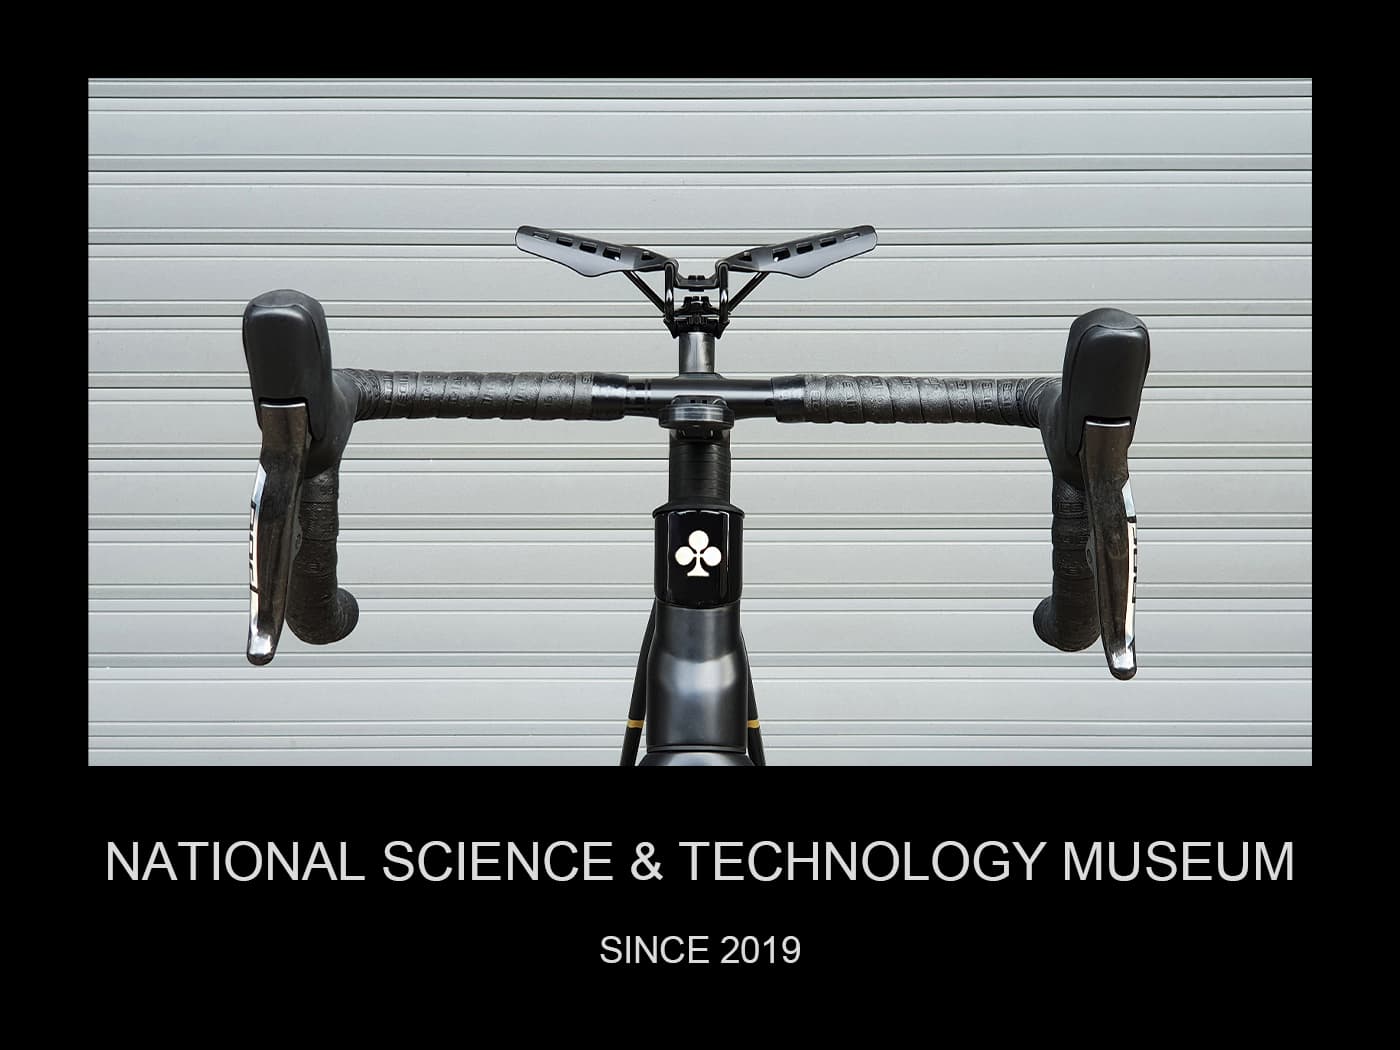 All-wings saddle has been officially displayed in the National Science & Technology Museum since 2019